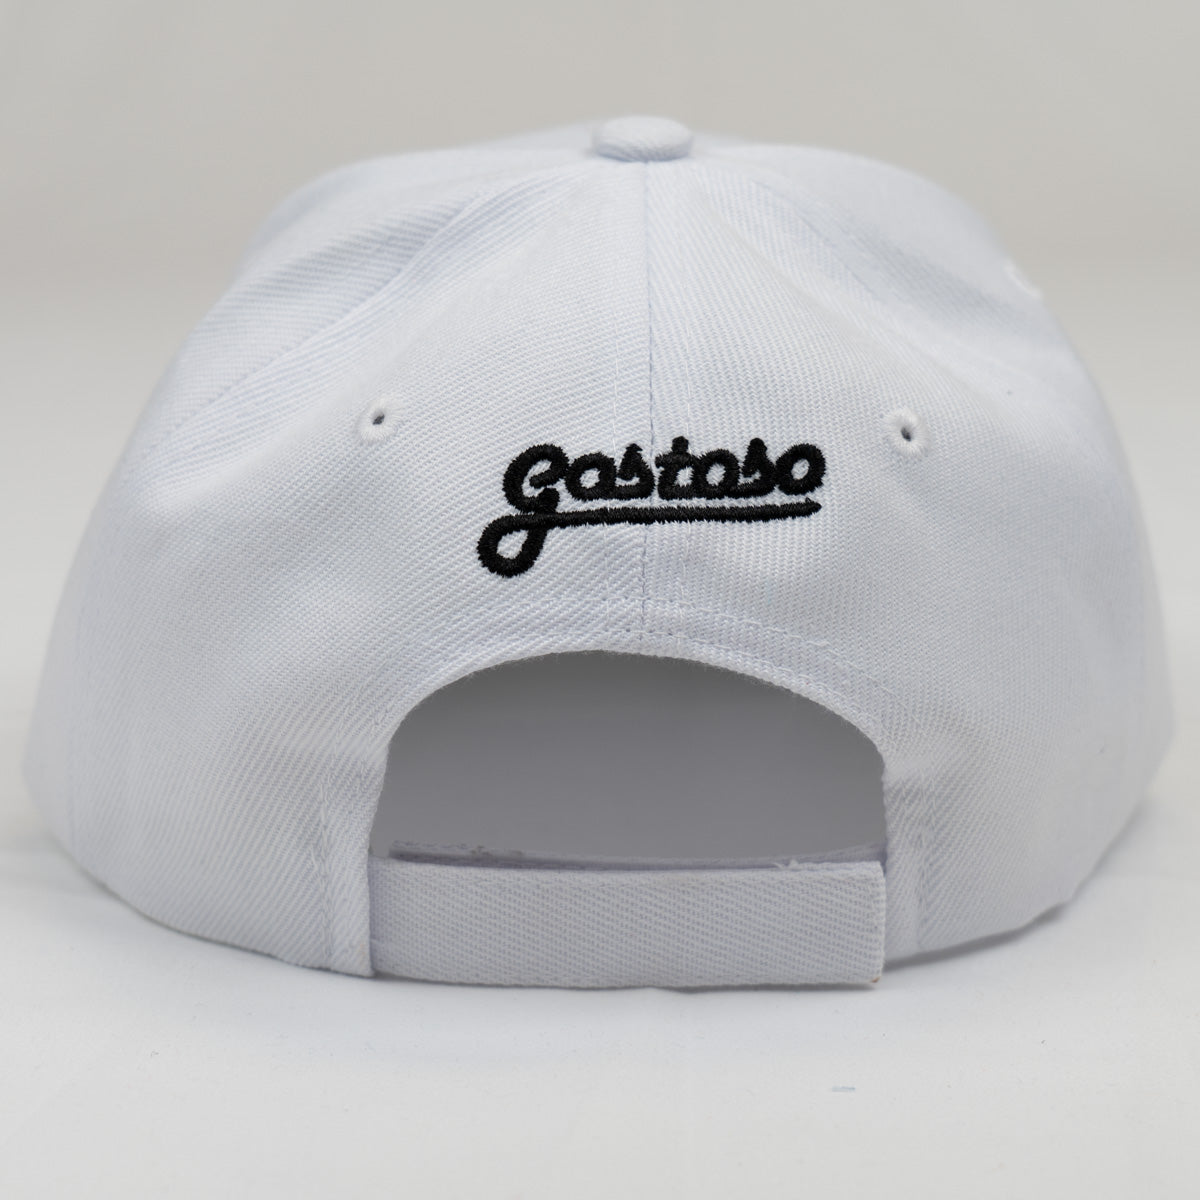 New 3D Puff Gostoso Stripes Logo Embroidered Baseball Hat